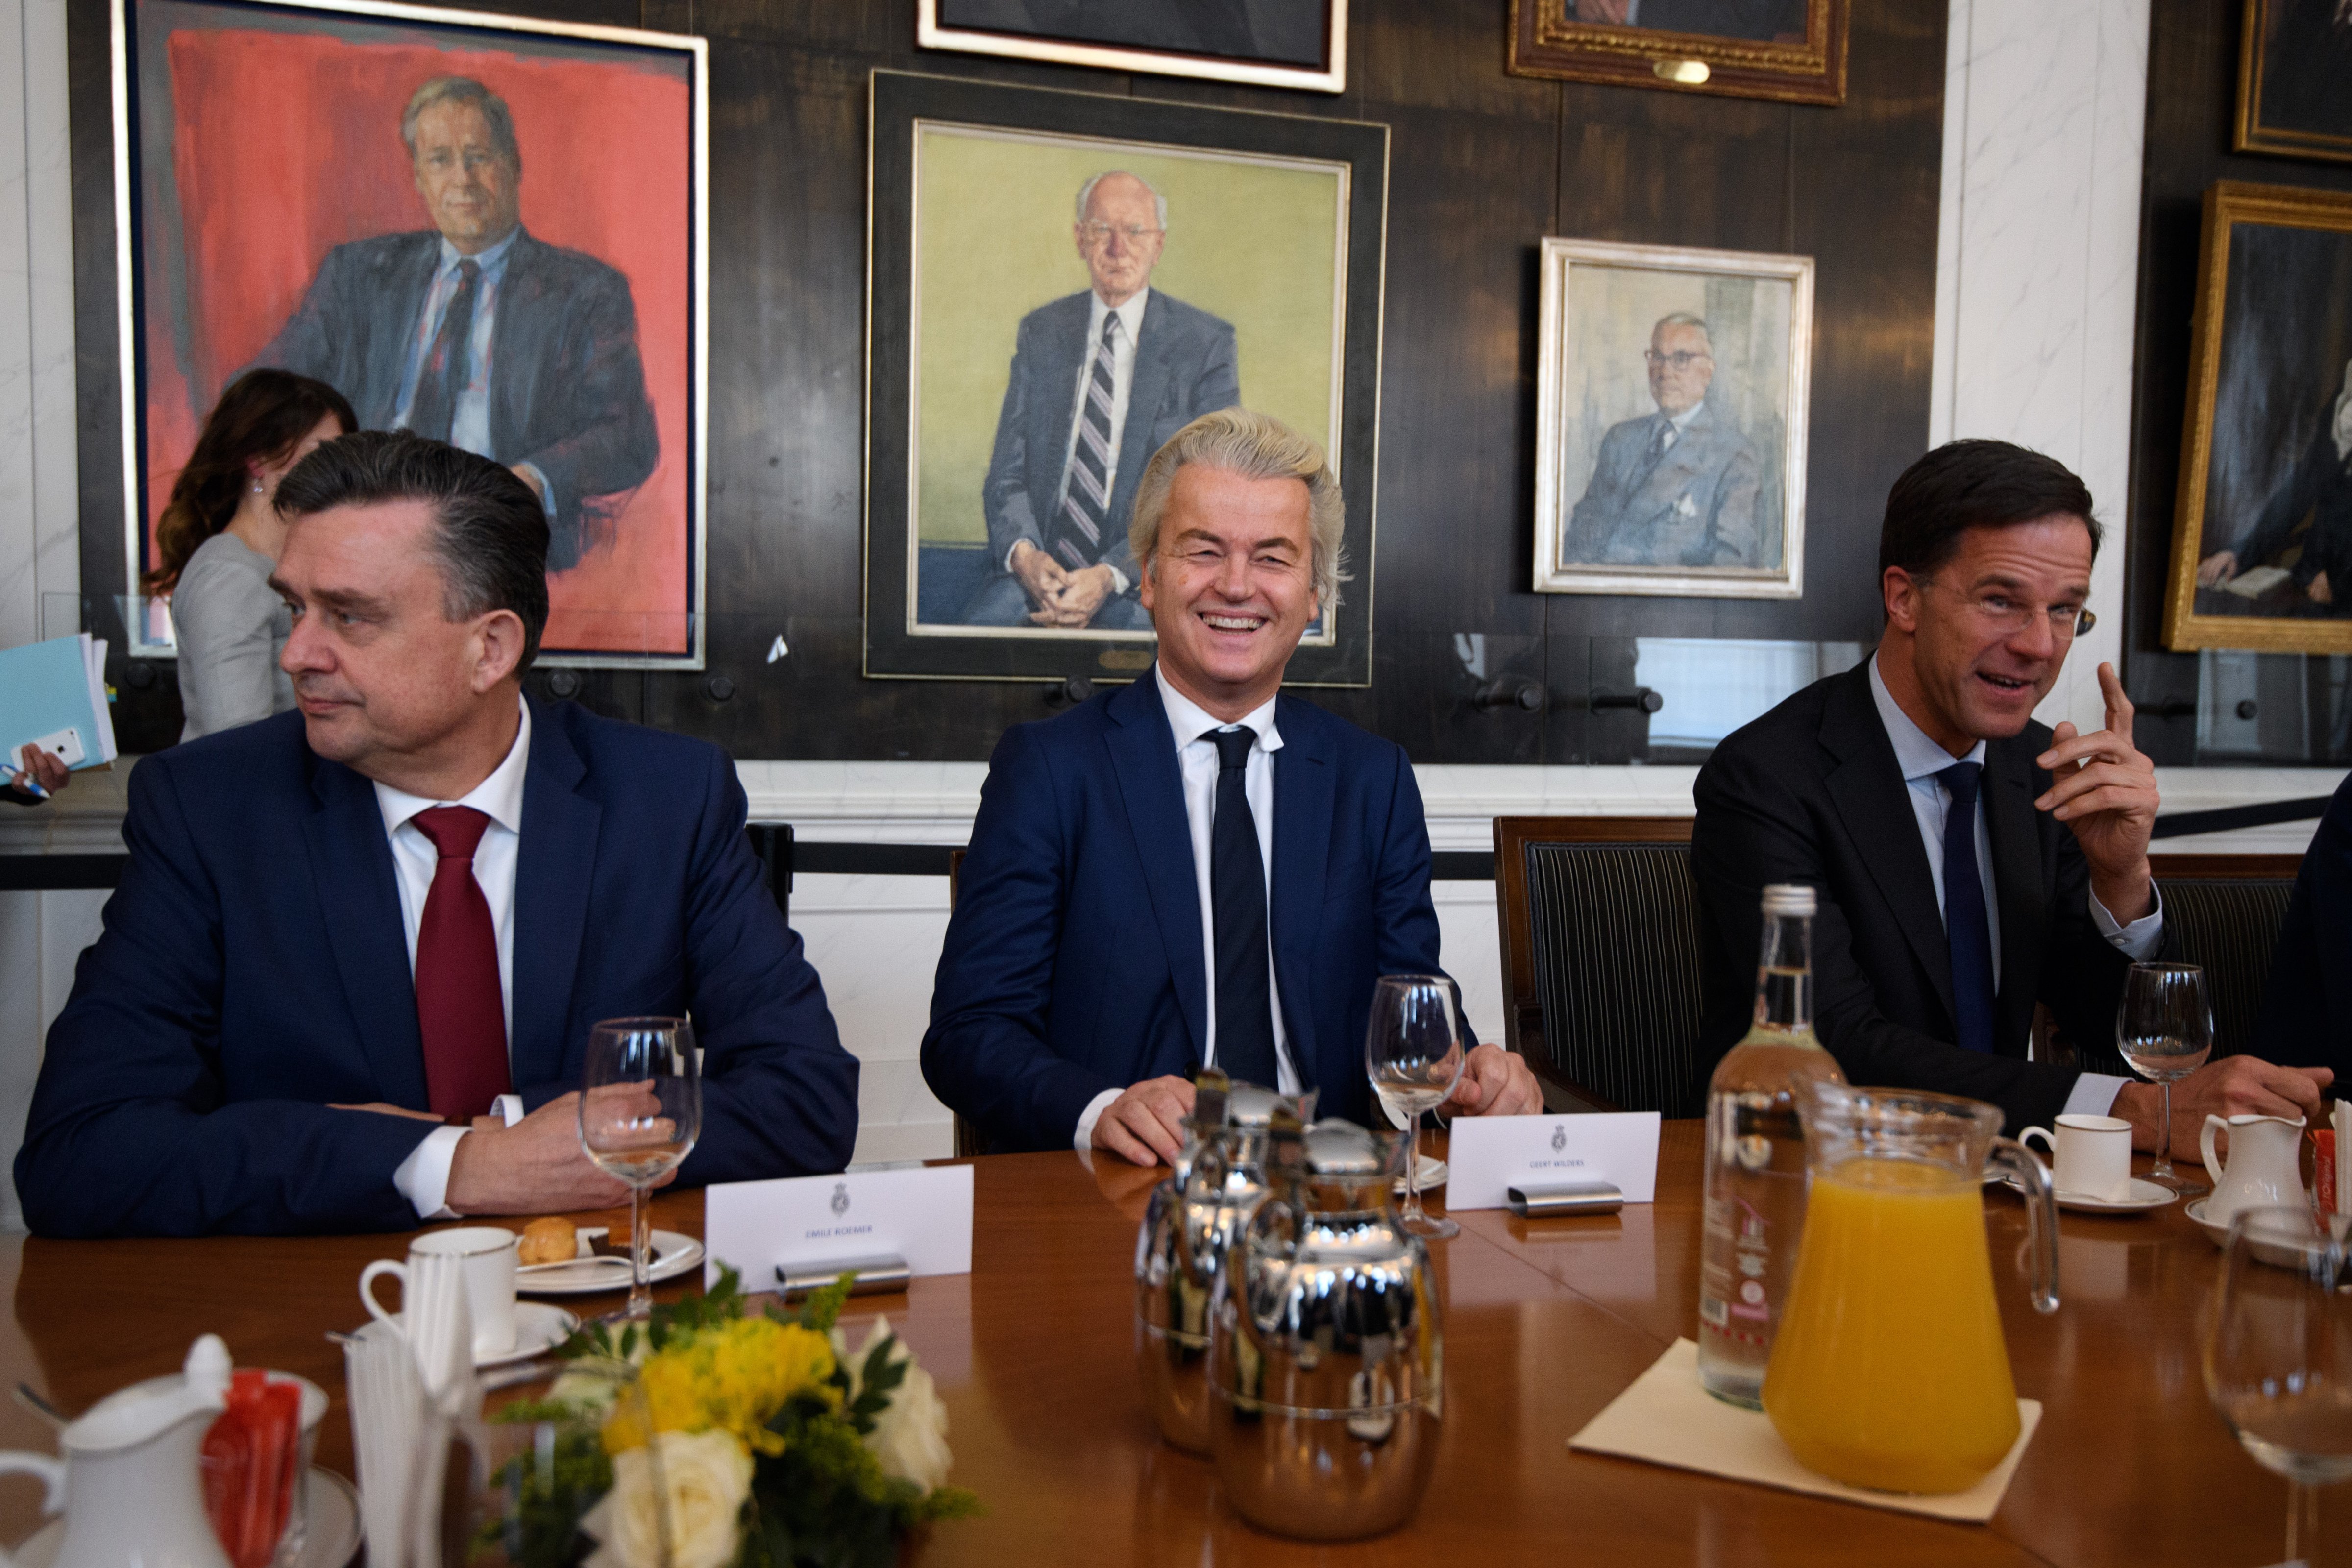 THE HAGUE, NETHERLANDS - MARCH 16:(L-R) Emile Roemer, leader of the Socialist Party; Party for Freedom (PVV) leader Geert Wilders and Dutch Prime Minister Mark Rutte attend a meeting of Dutch political party leaders at the House of Representatives to express their views on the formation of the cabinet, on March 16, 2017 in The Hague, Netherlands. (Carl Court—Getty Images)